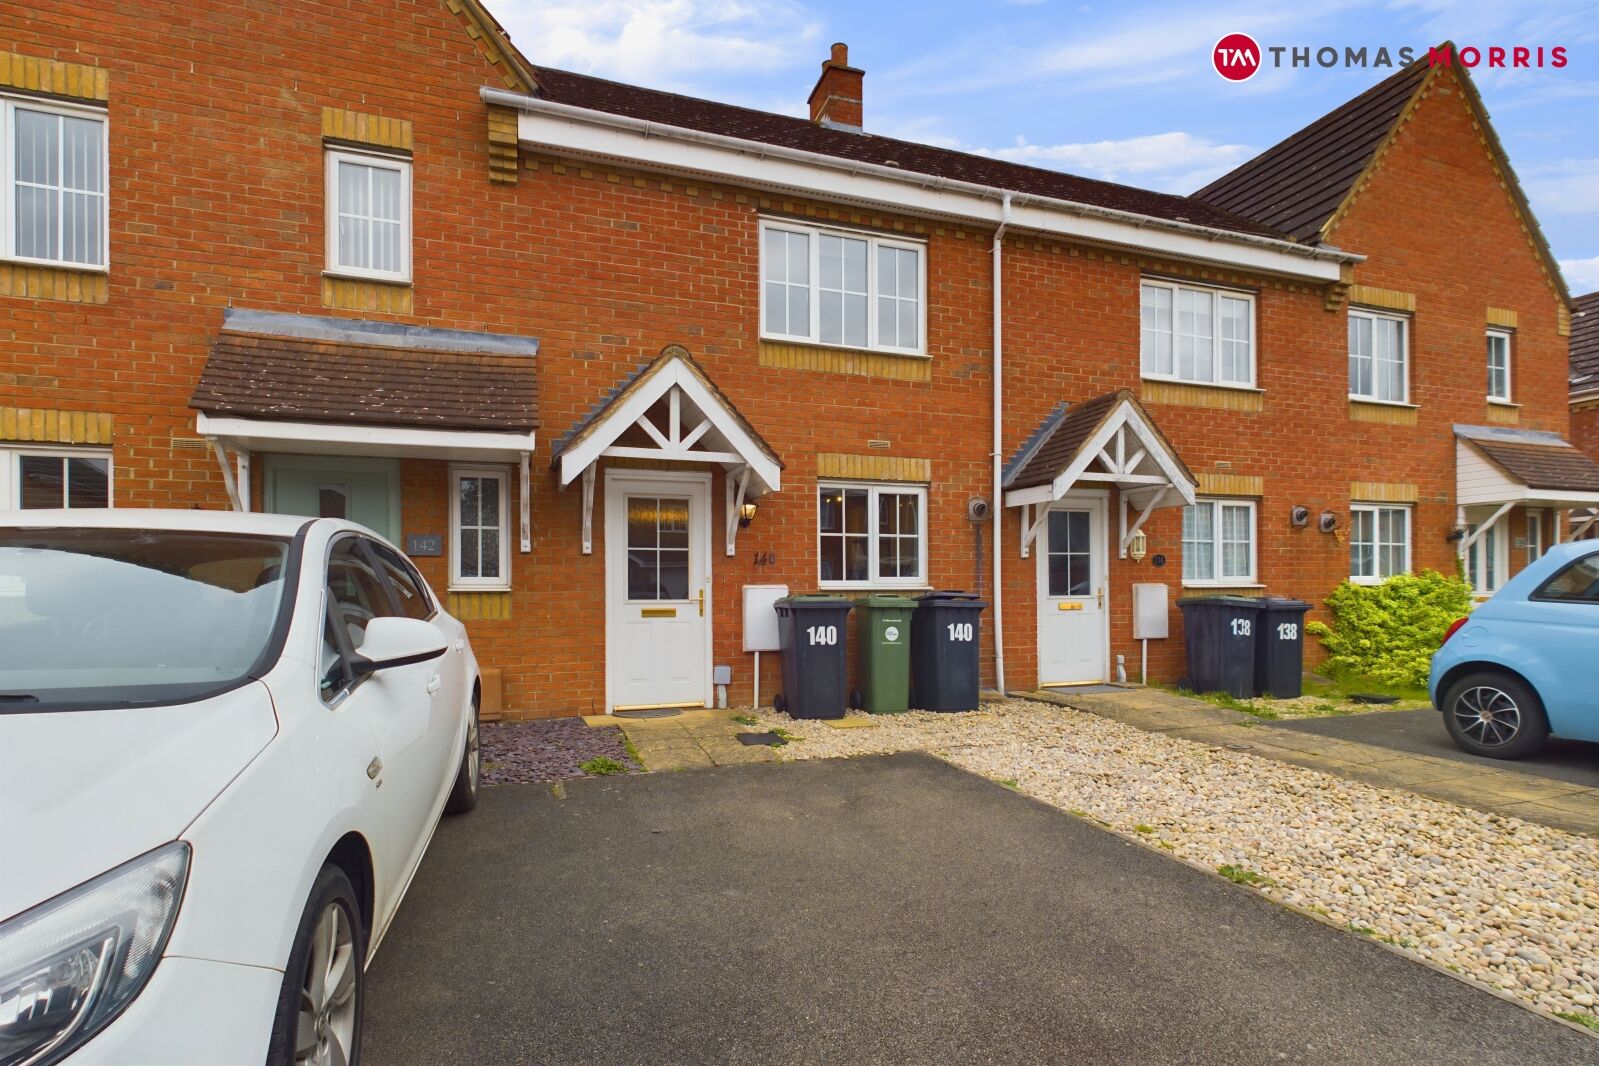 2 bedroom mid terraced house for sale Brunel Drive, Biggleswade, SG18, main image